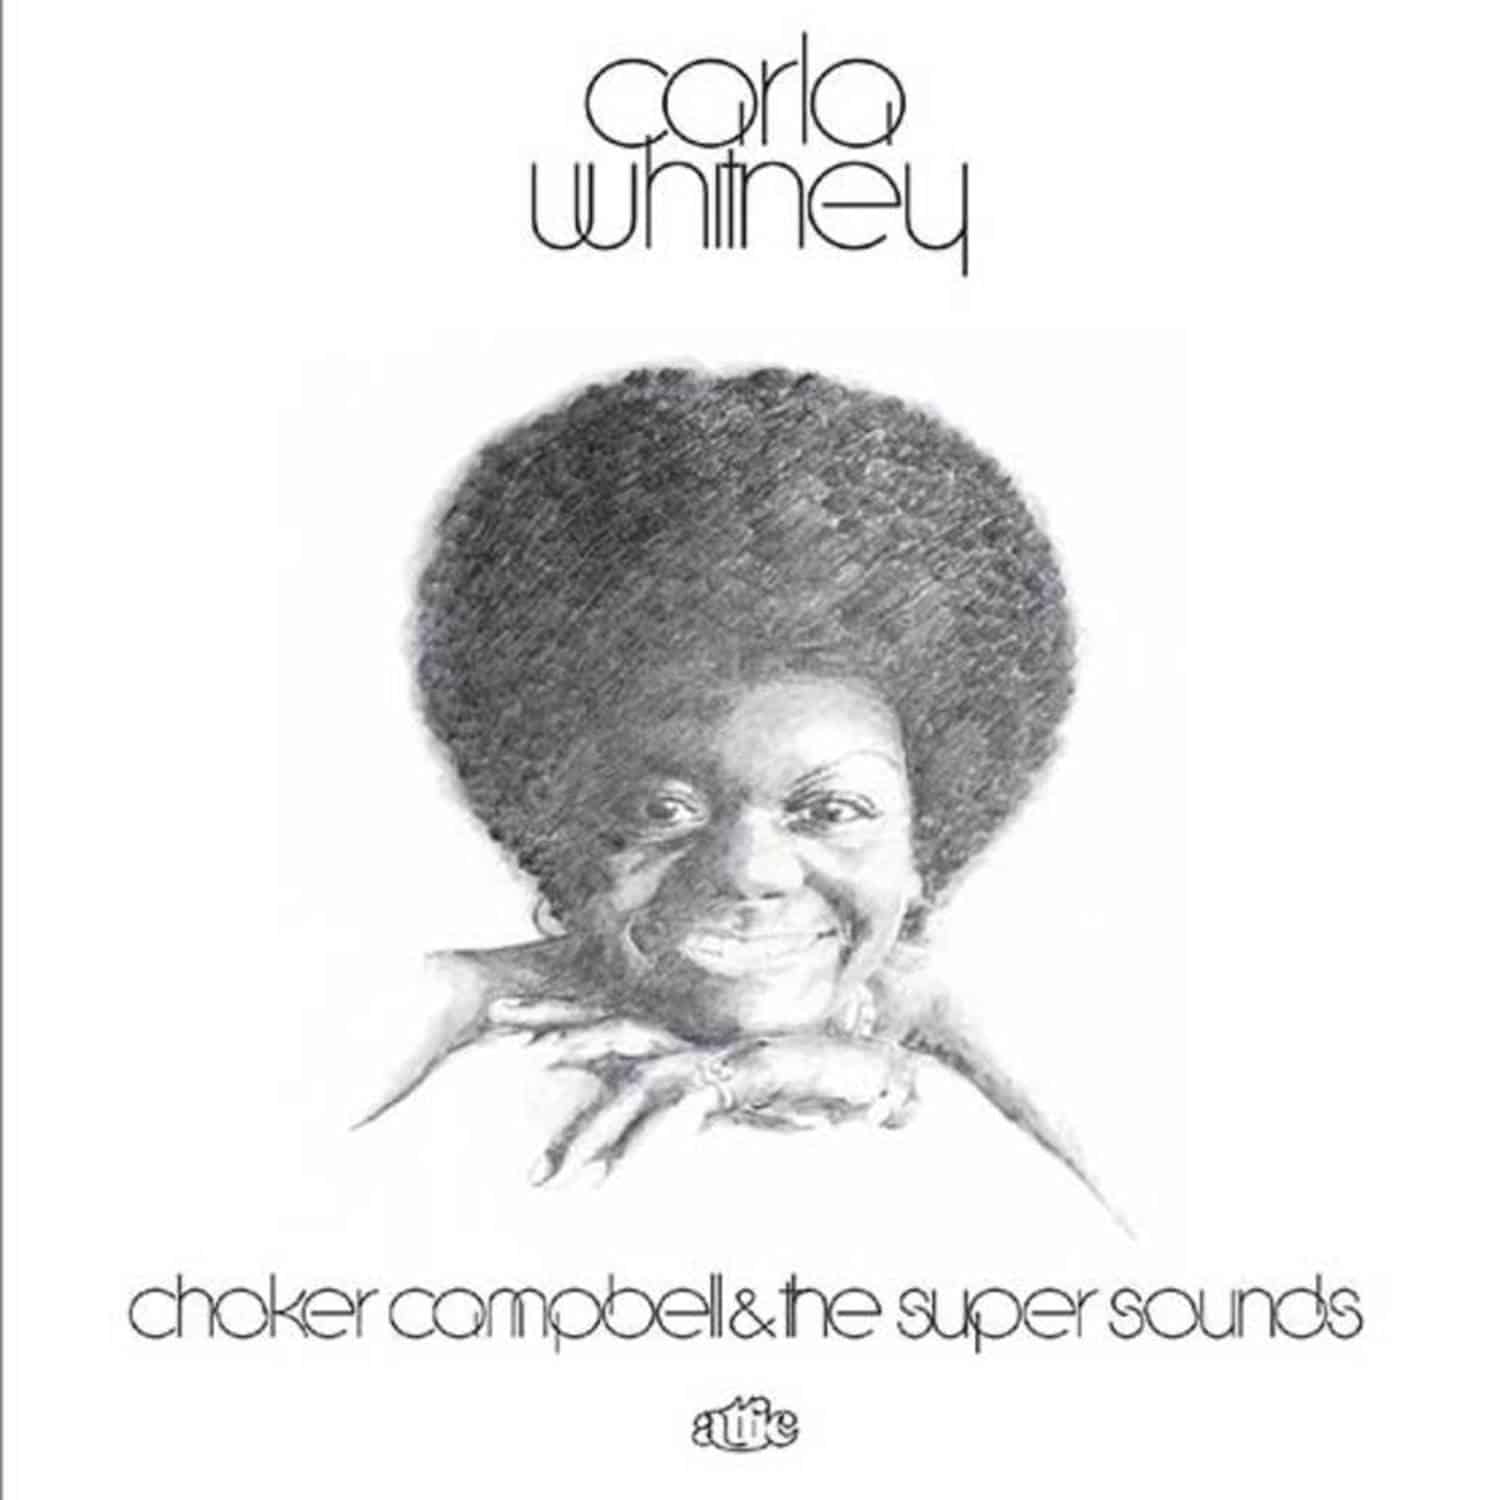 Carla Whitney - CHOKER CAMPBELL AND THE SUPER SOUNDS 